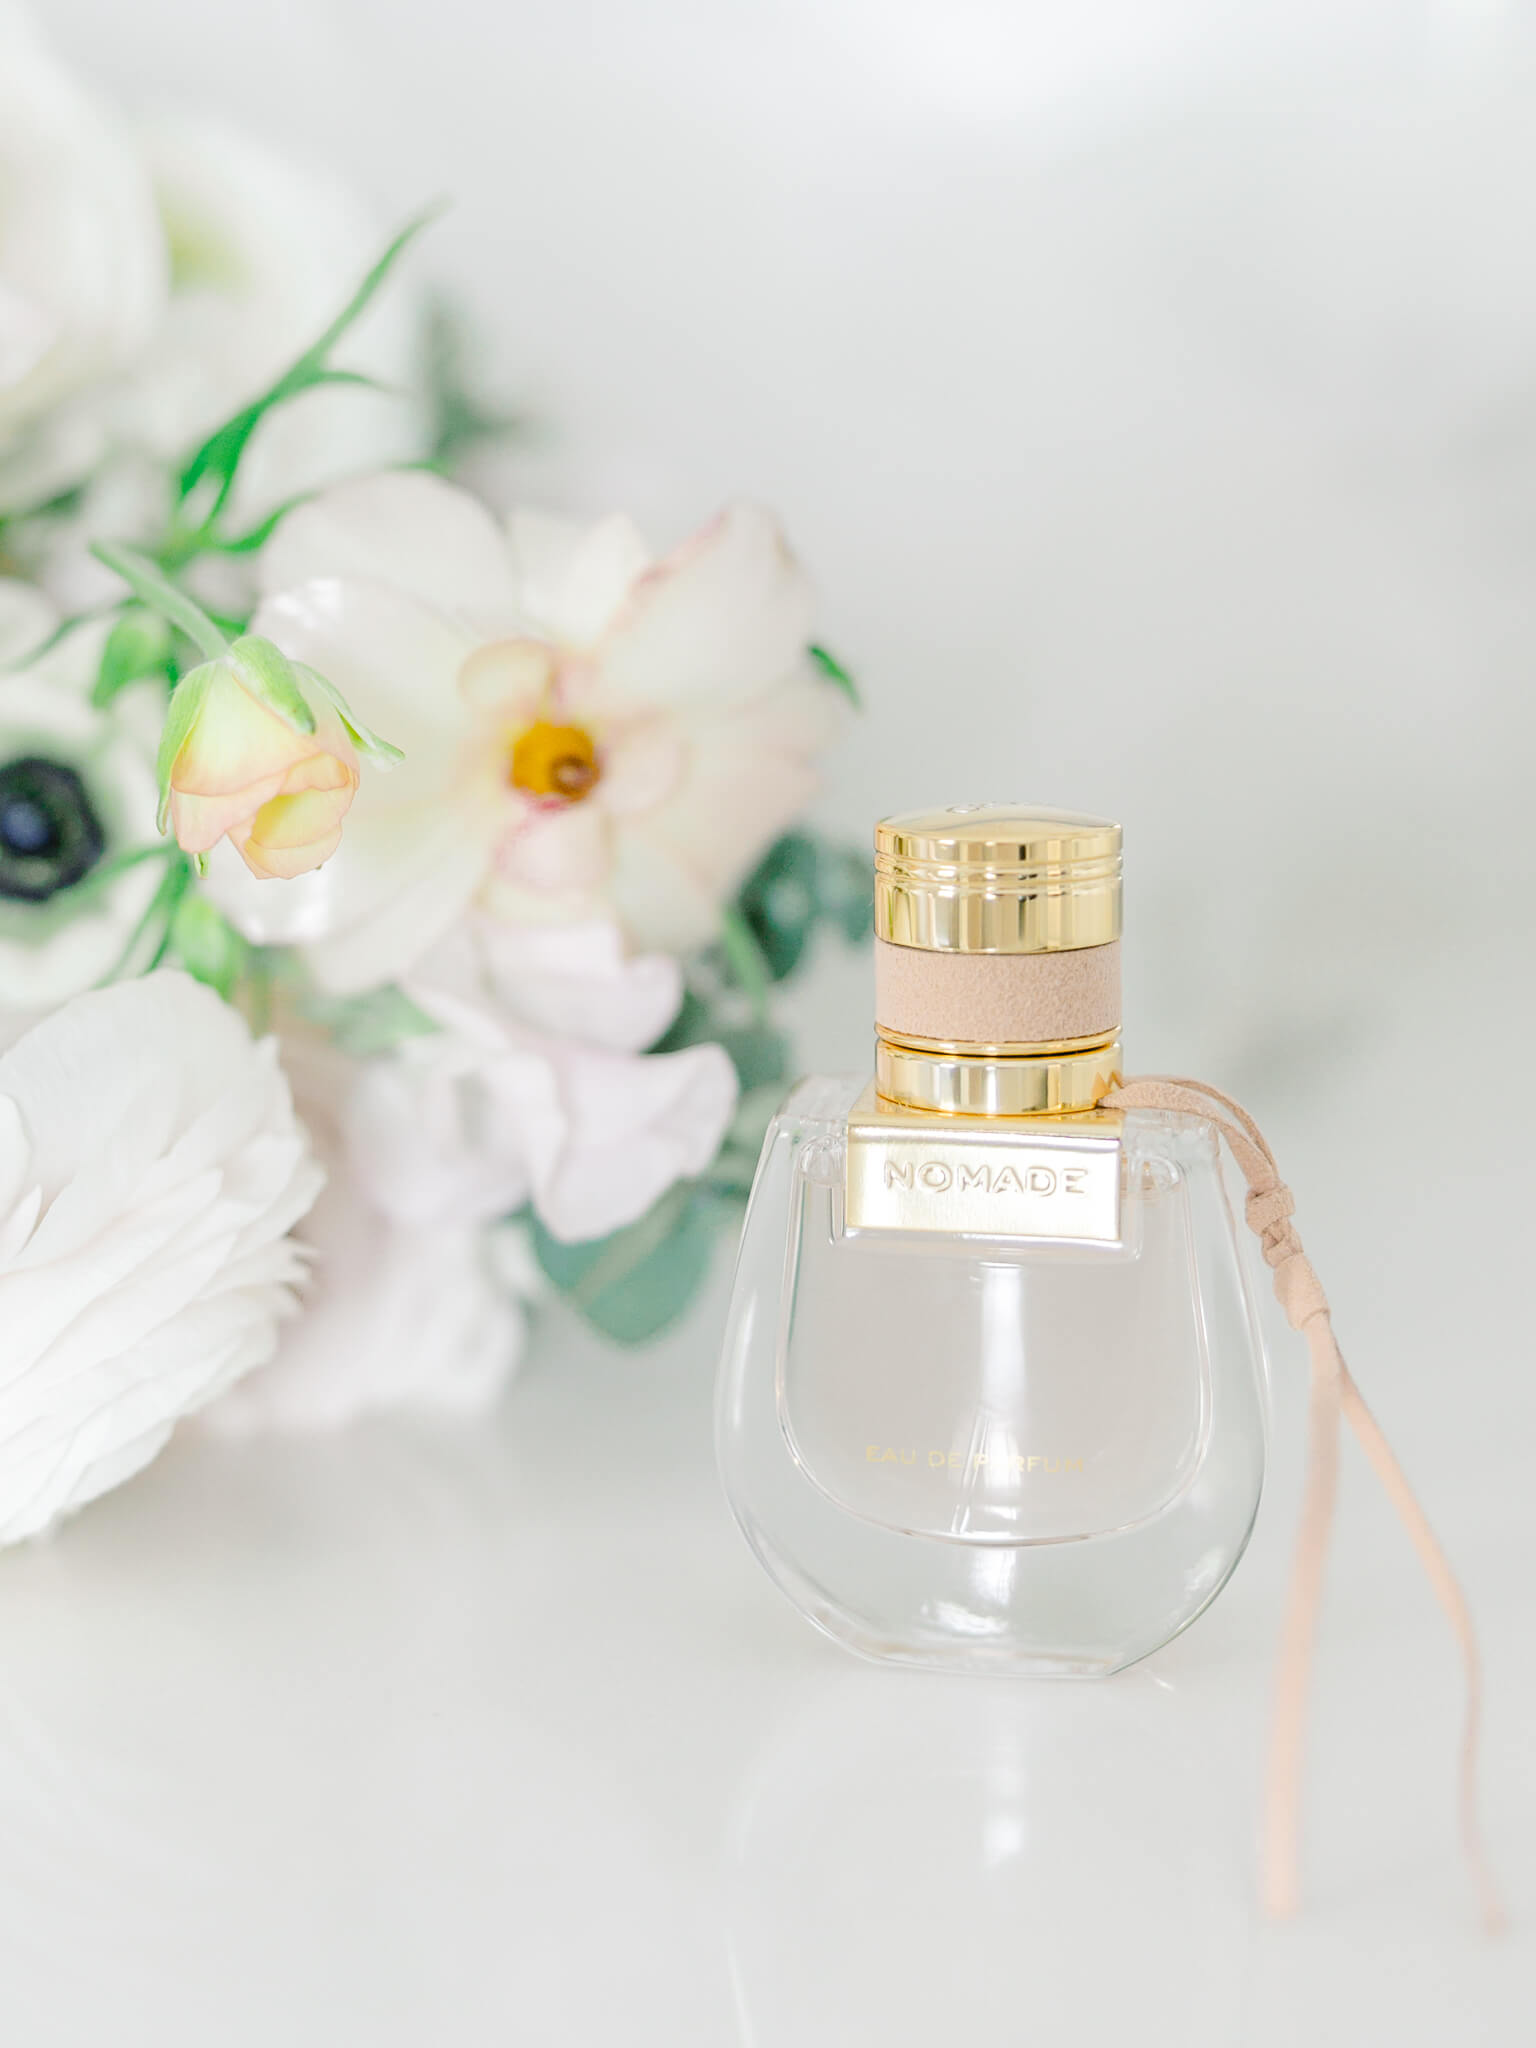 A close up of Chloe's perfume Nomade with wedding flowers.